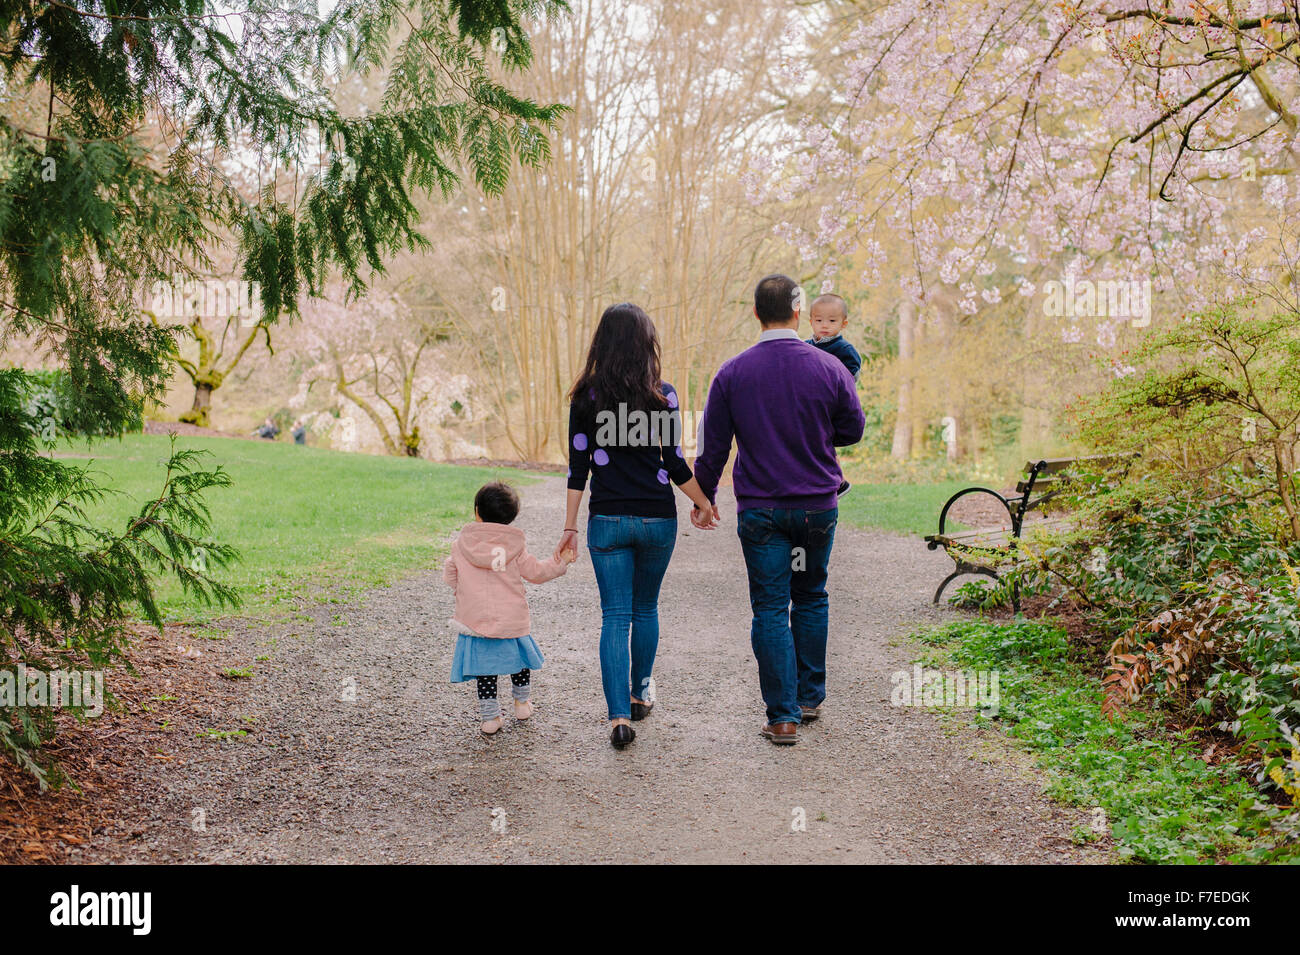 USA, Rear view of family with two children (2-3) in park Stock Photo